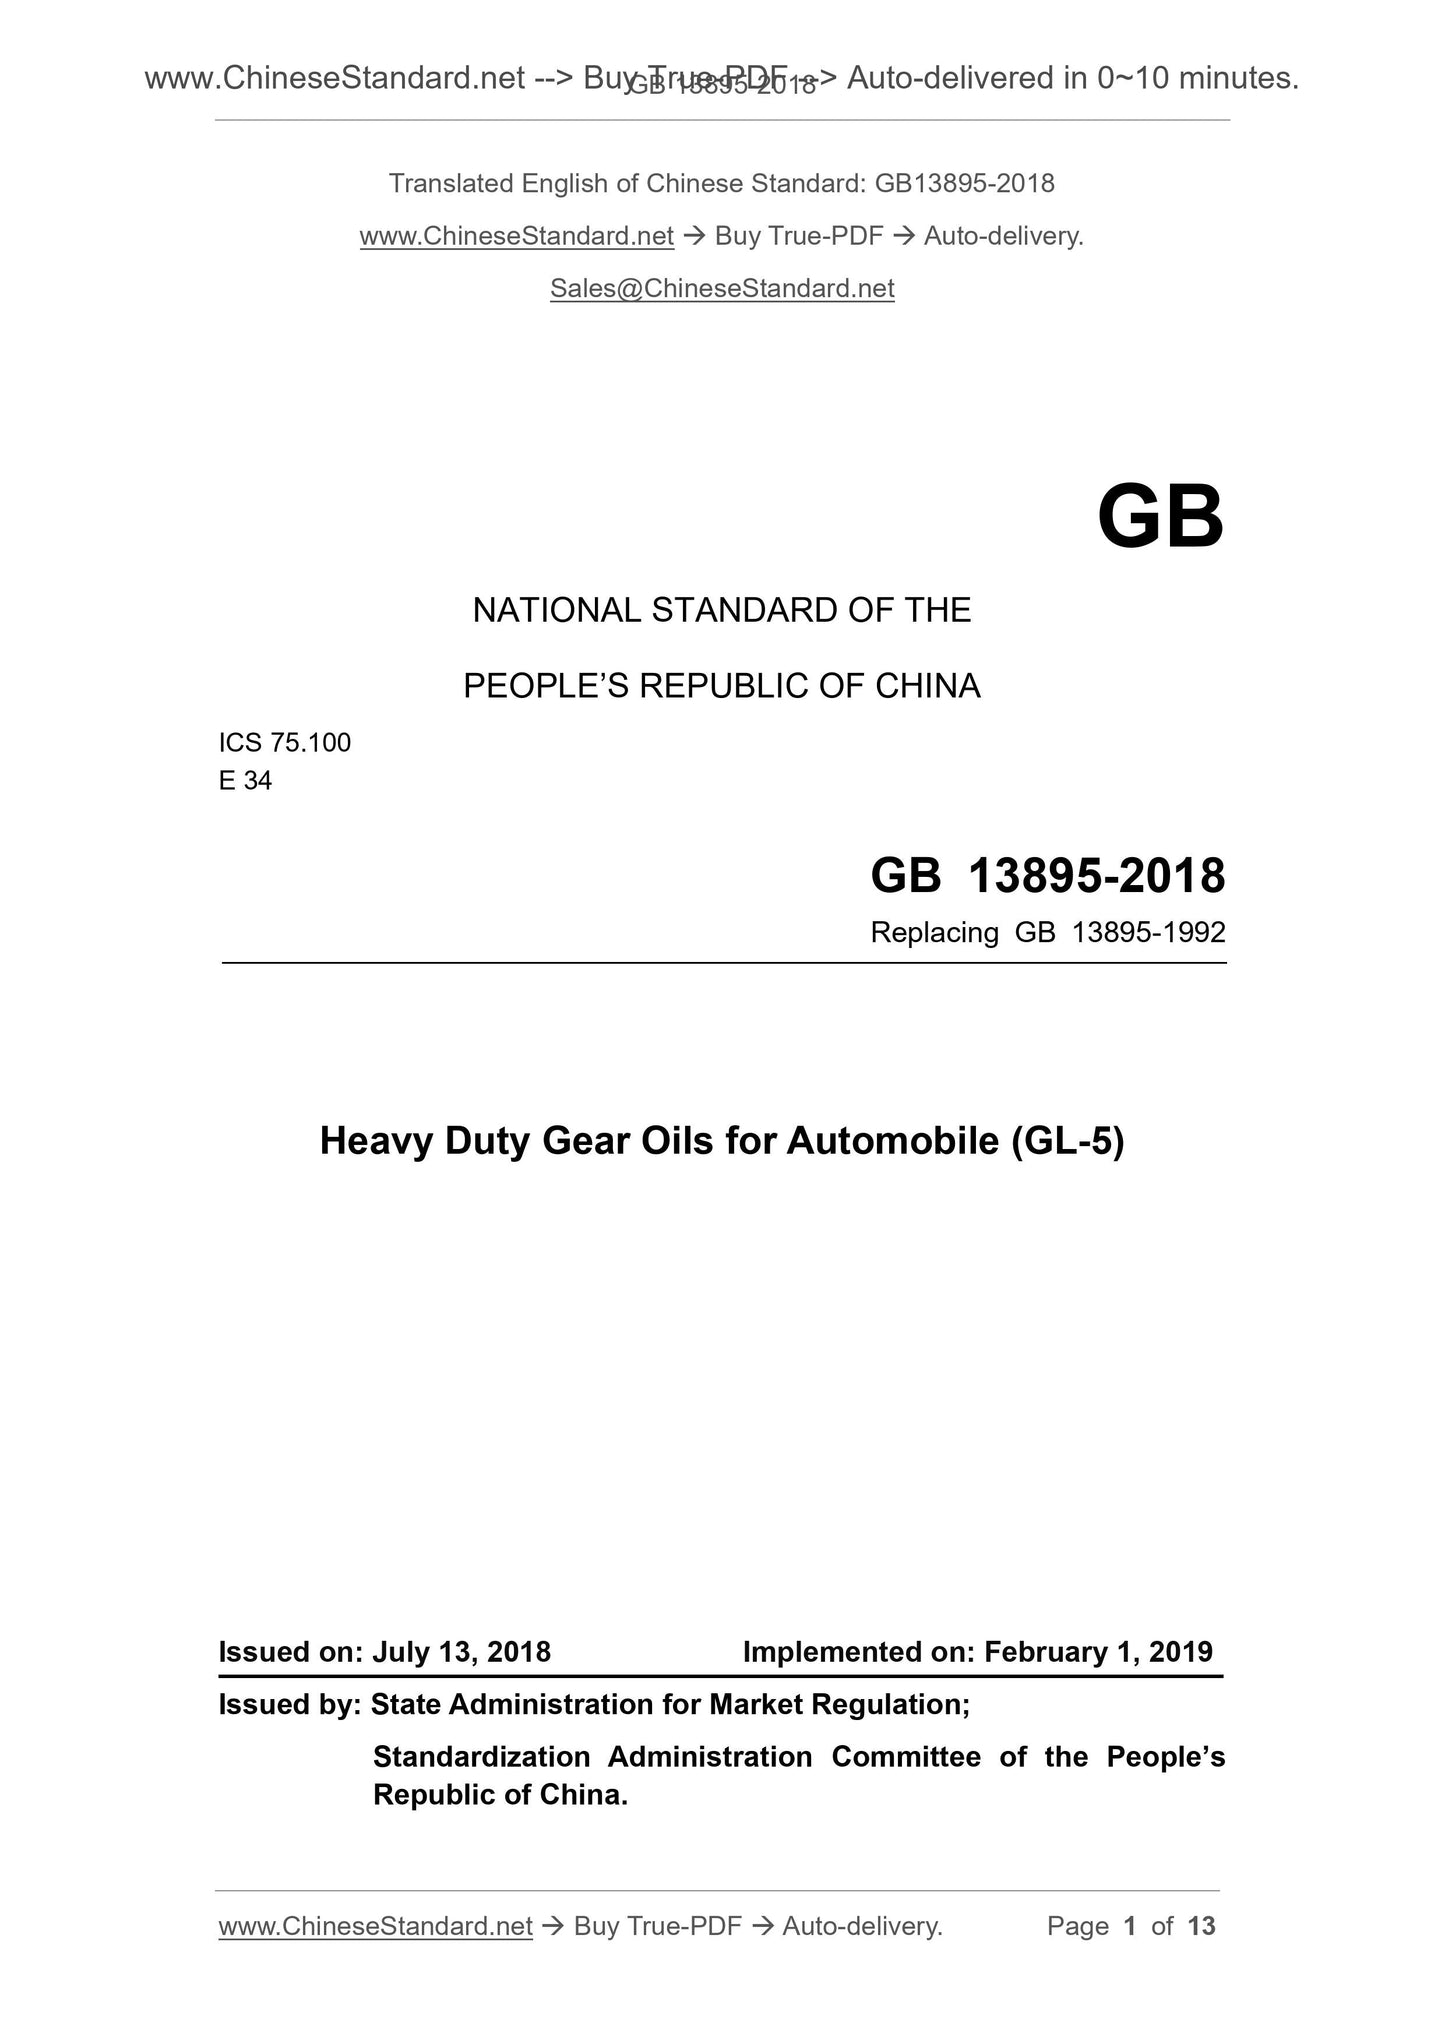 GB 13895-2018 Page 1